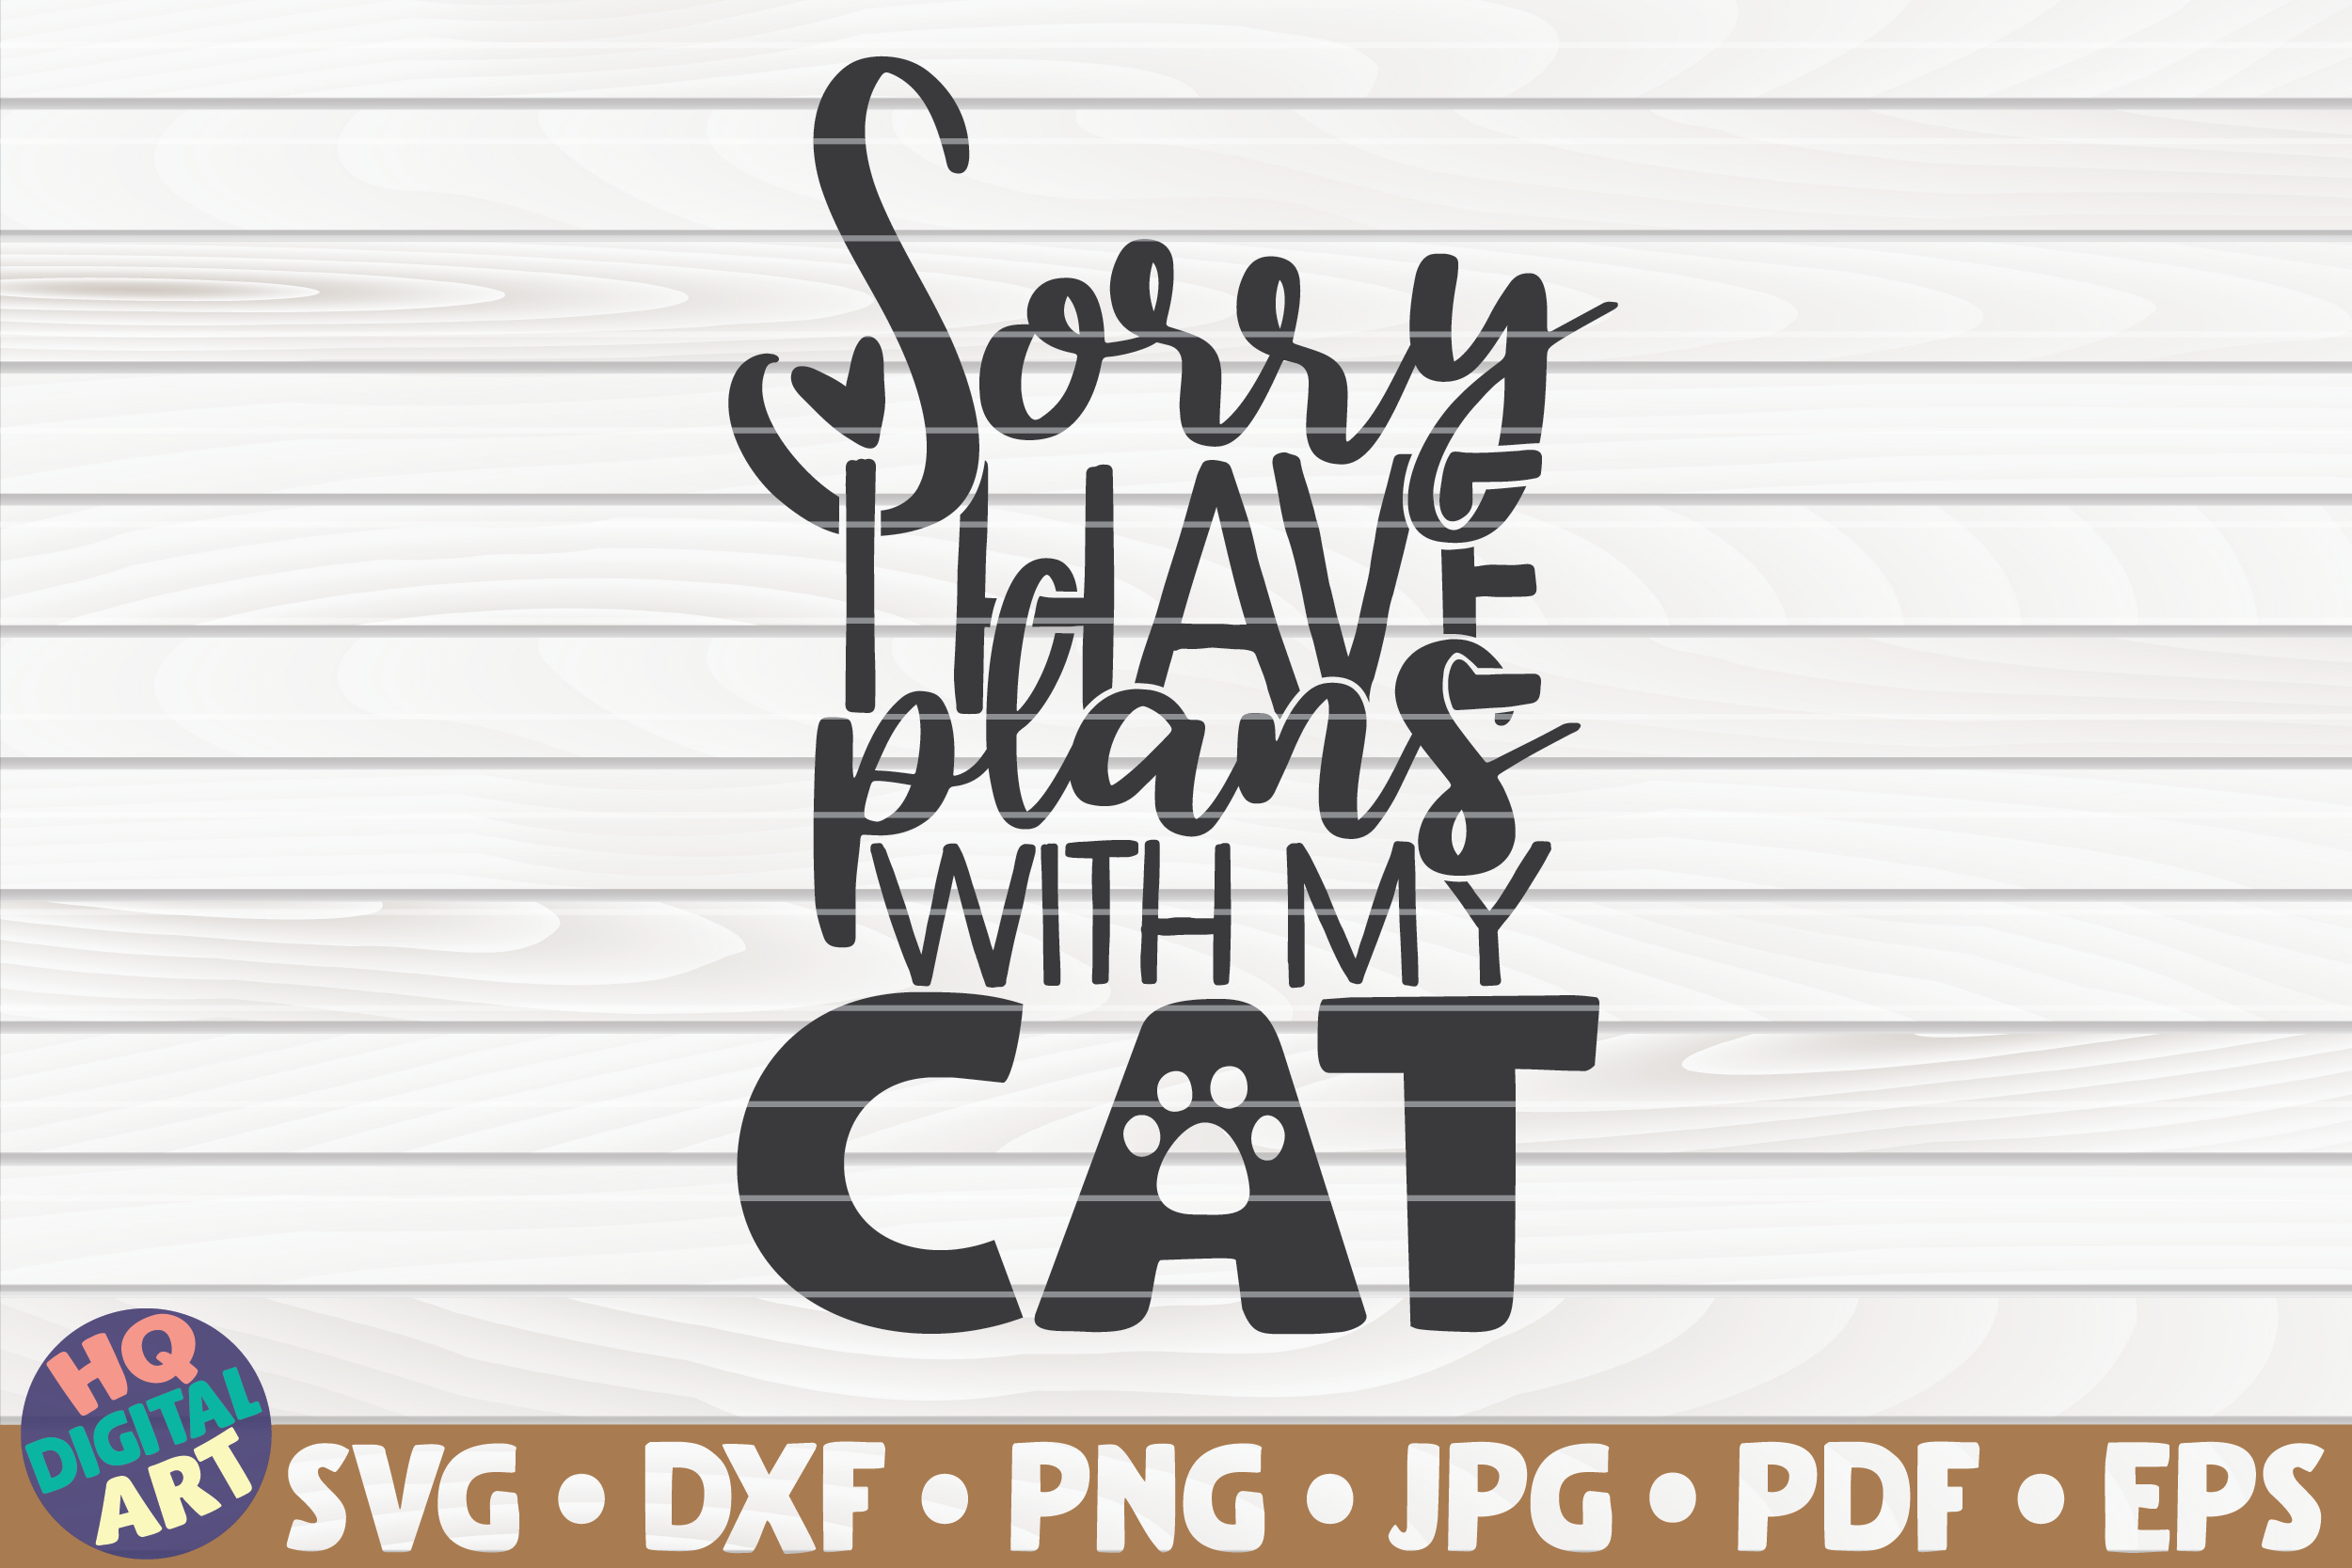 Sorry I have plans with my cat SVG By HQDigitalArt | TheHungryJPEG